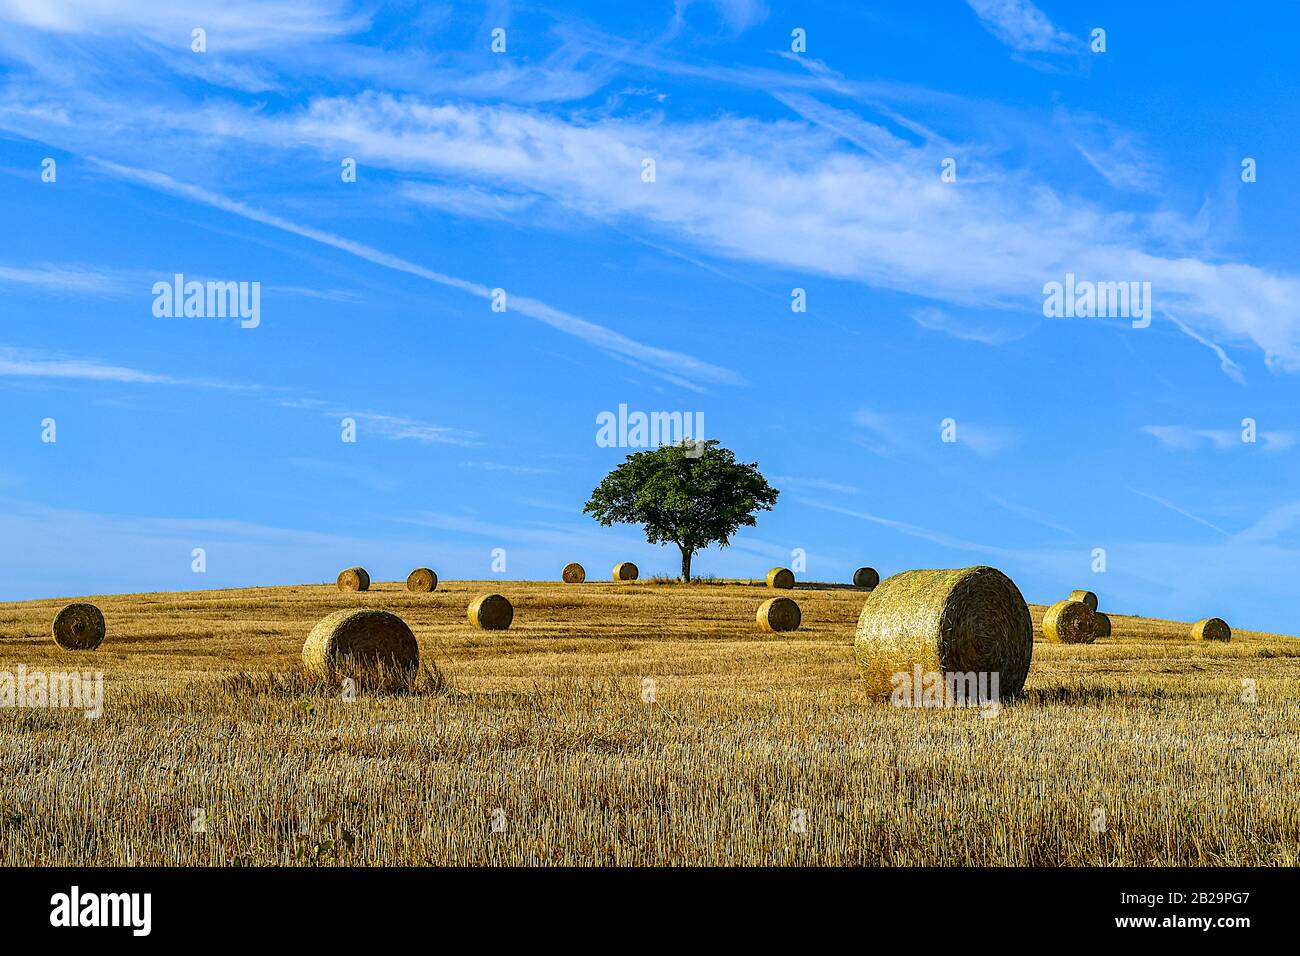 Hay bales in field under blue sky, France Stock Photo